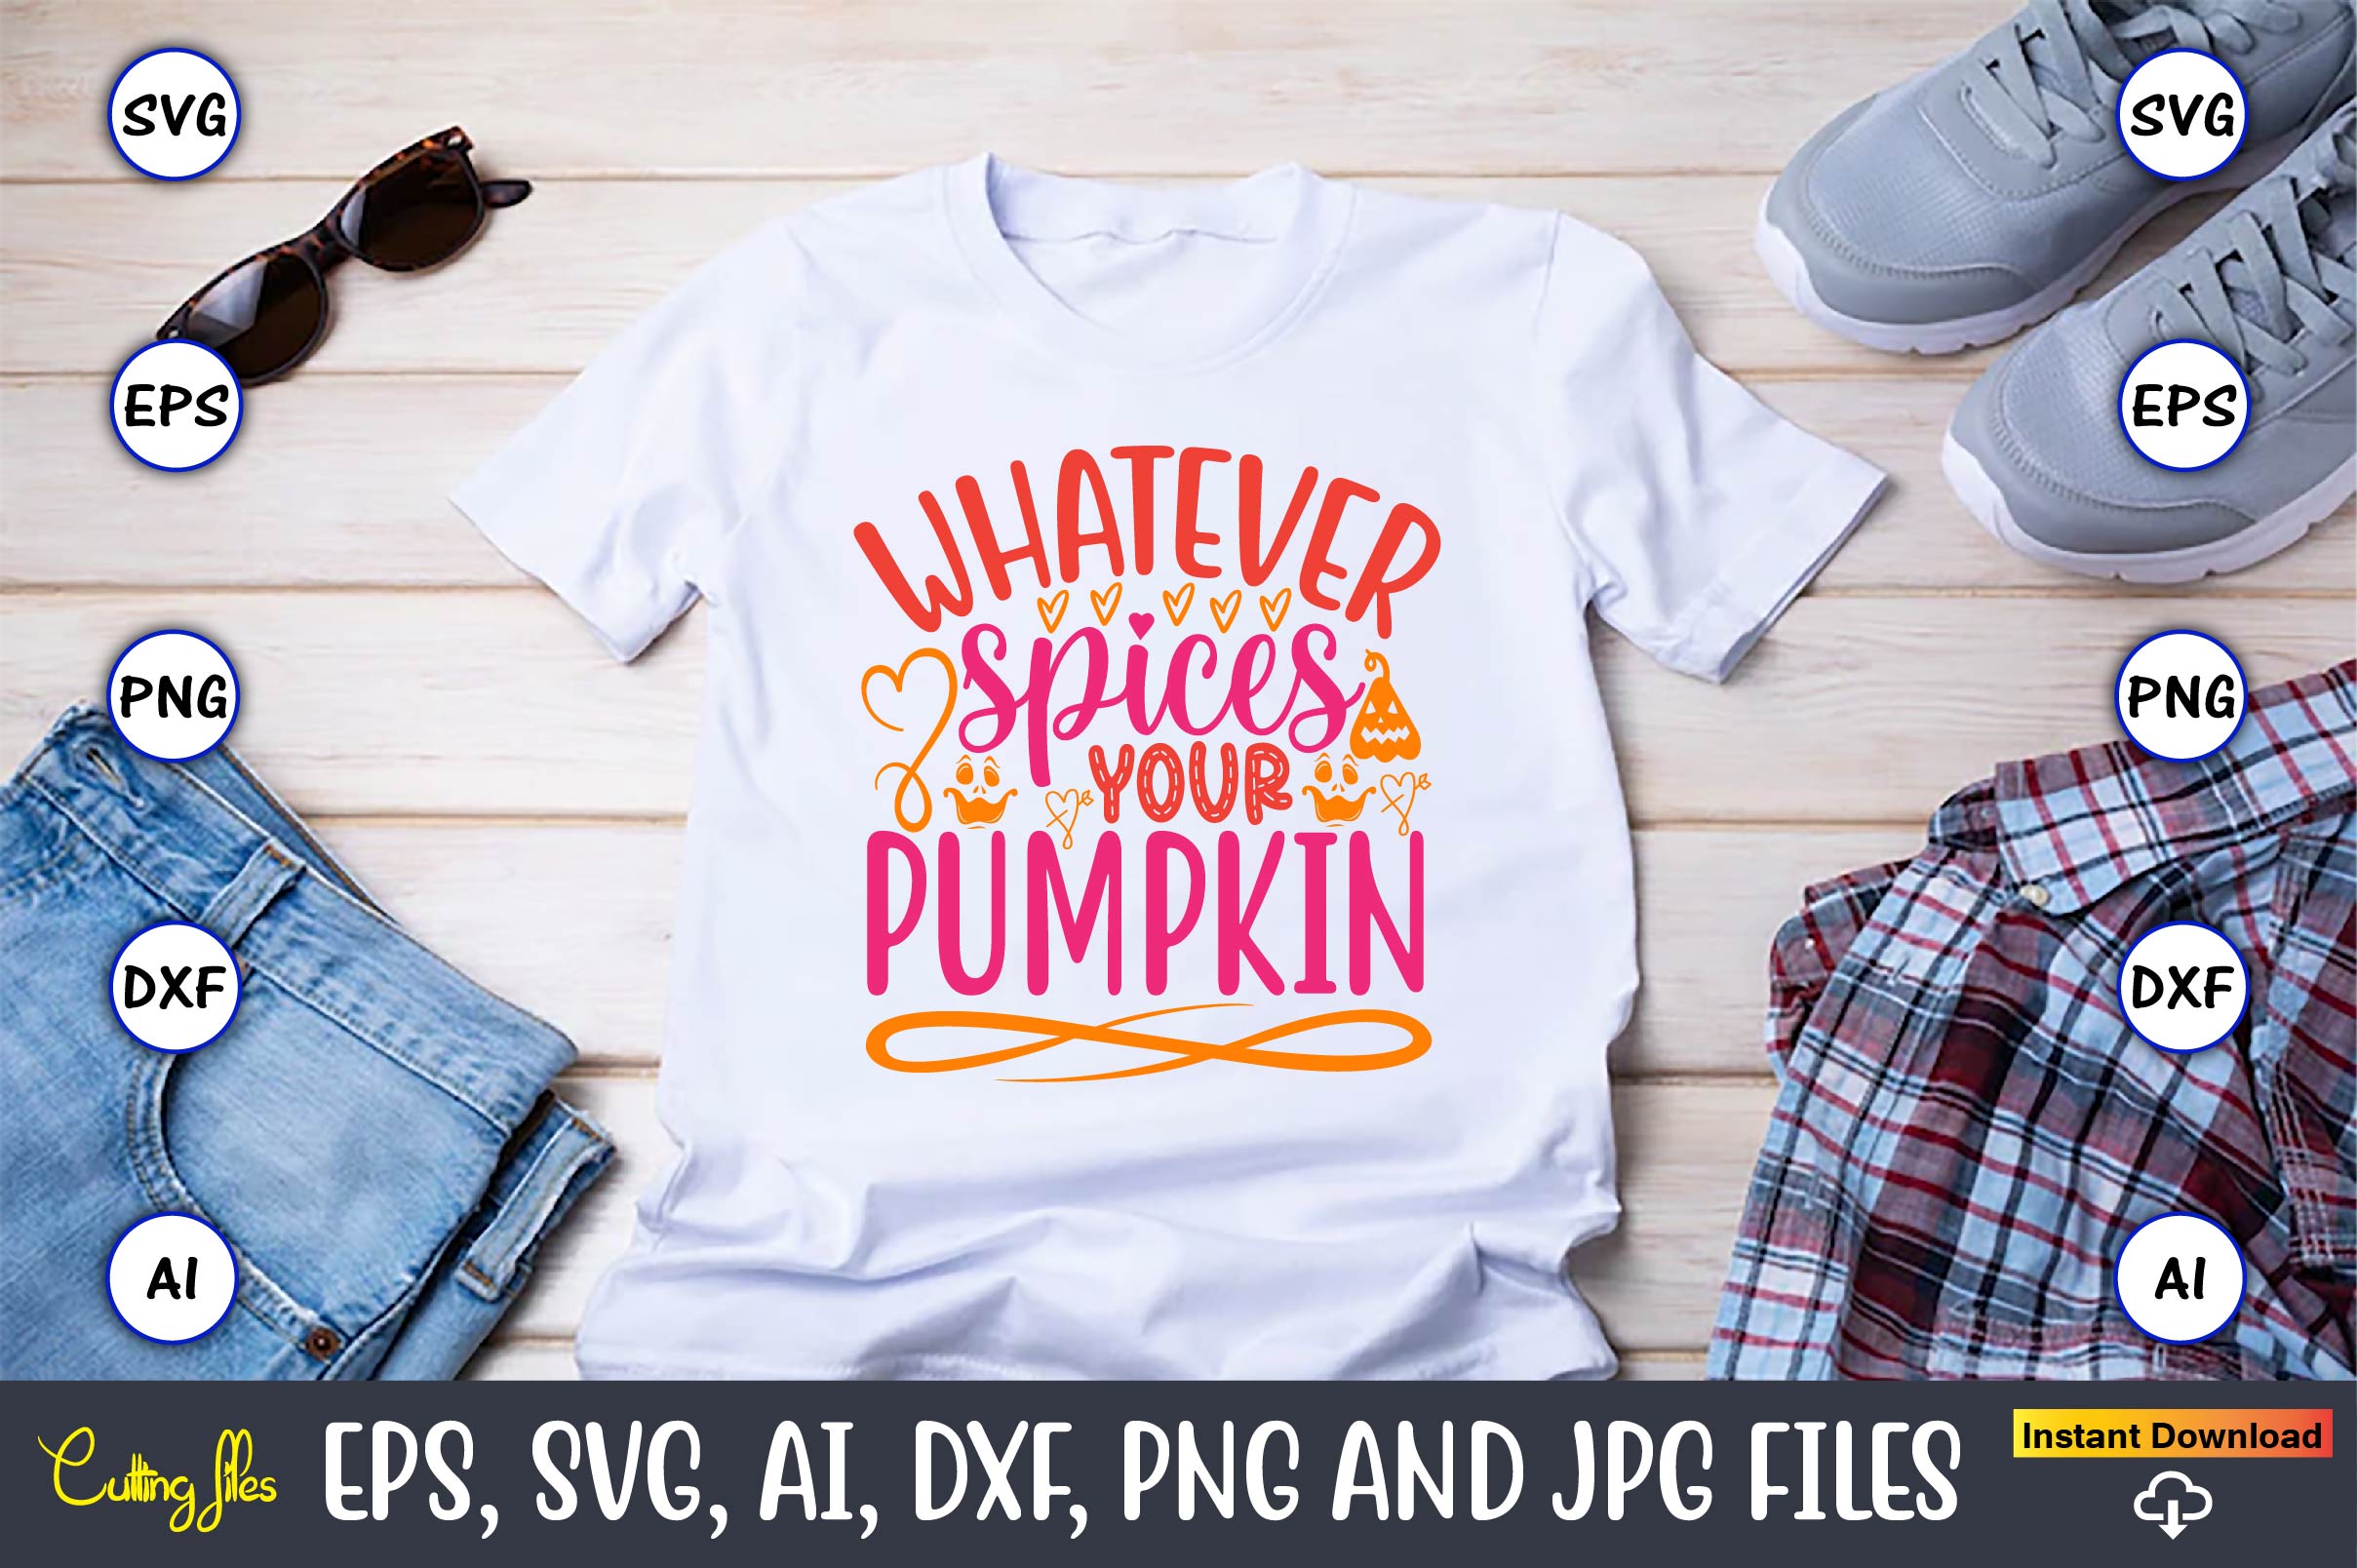 Image of a white t-shirt with amazingly slogan Whatever spices your pumpkin.